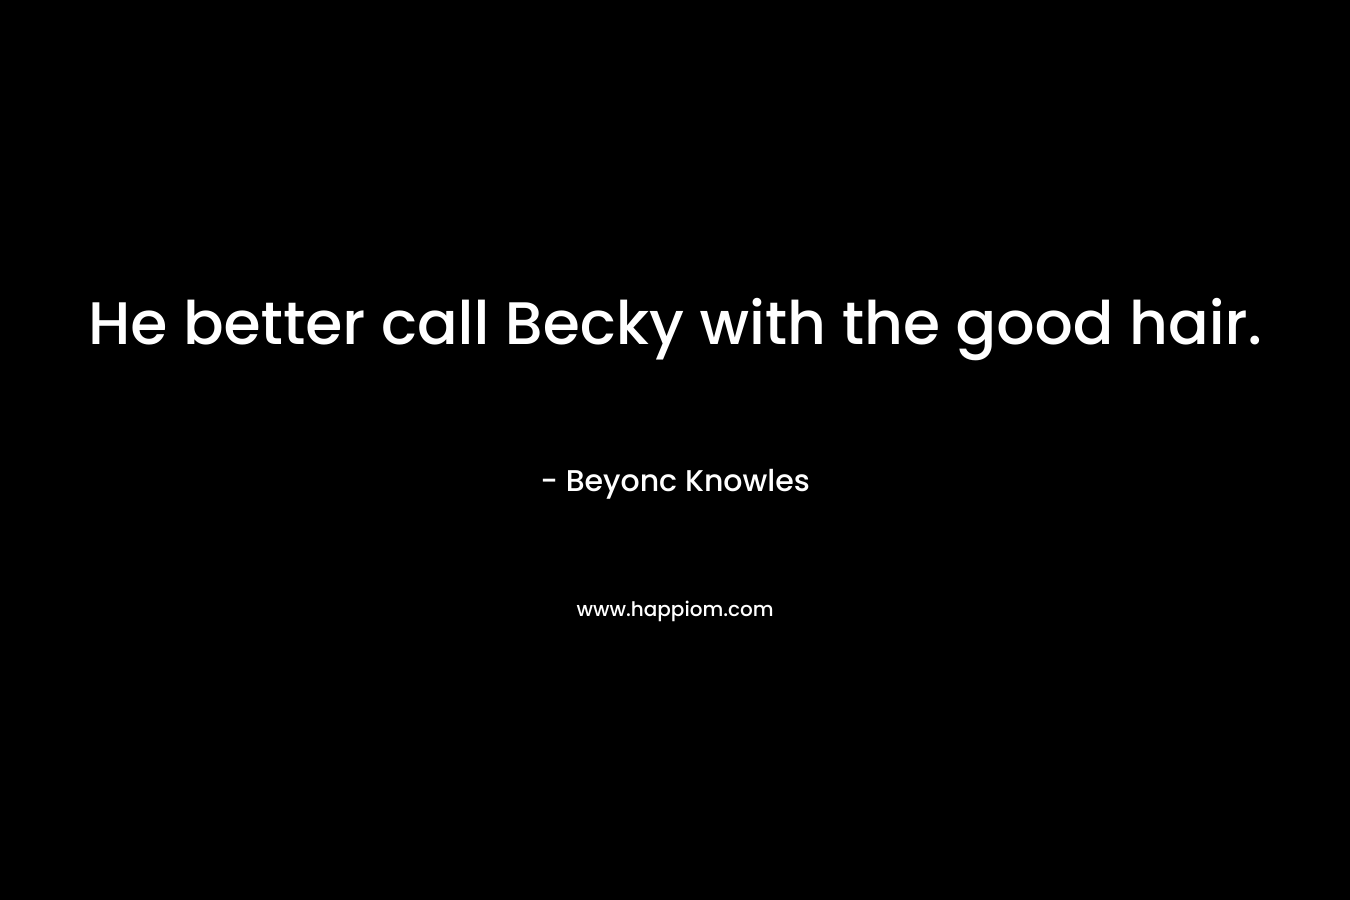 He better call Becky with the good hair. – Beyonc Knowles